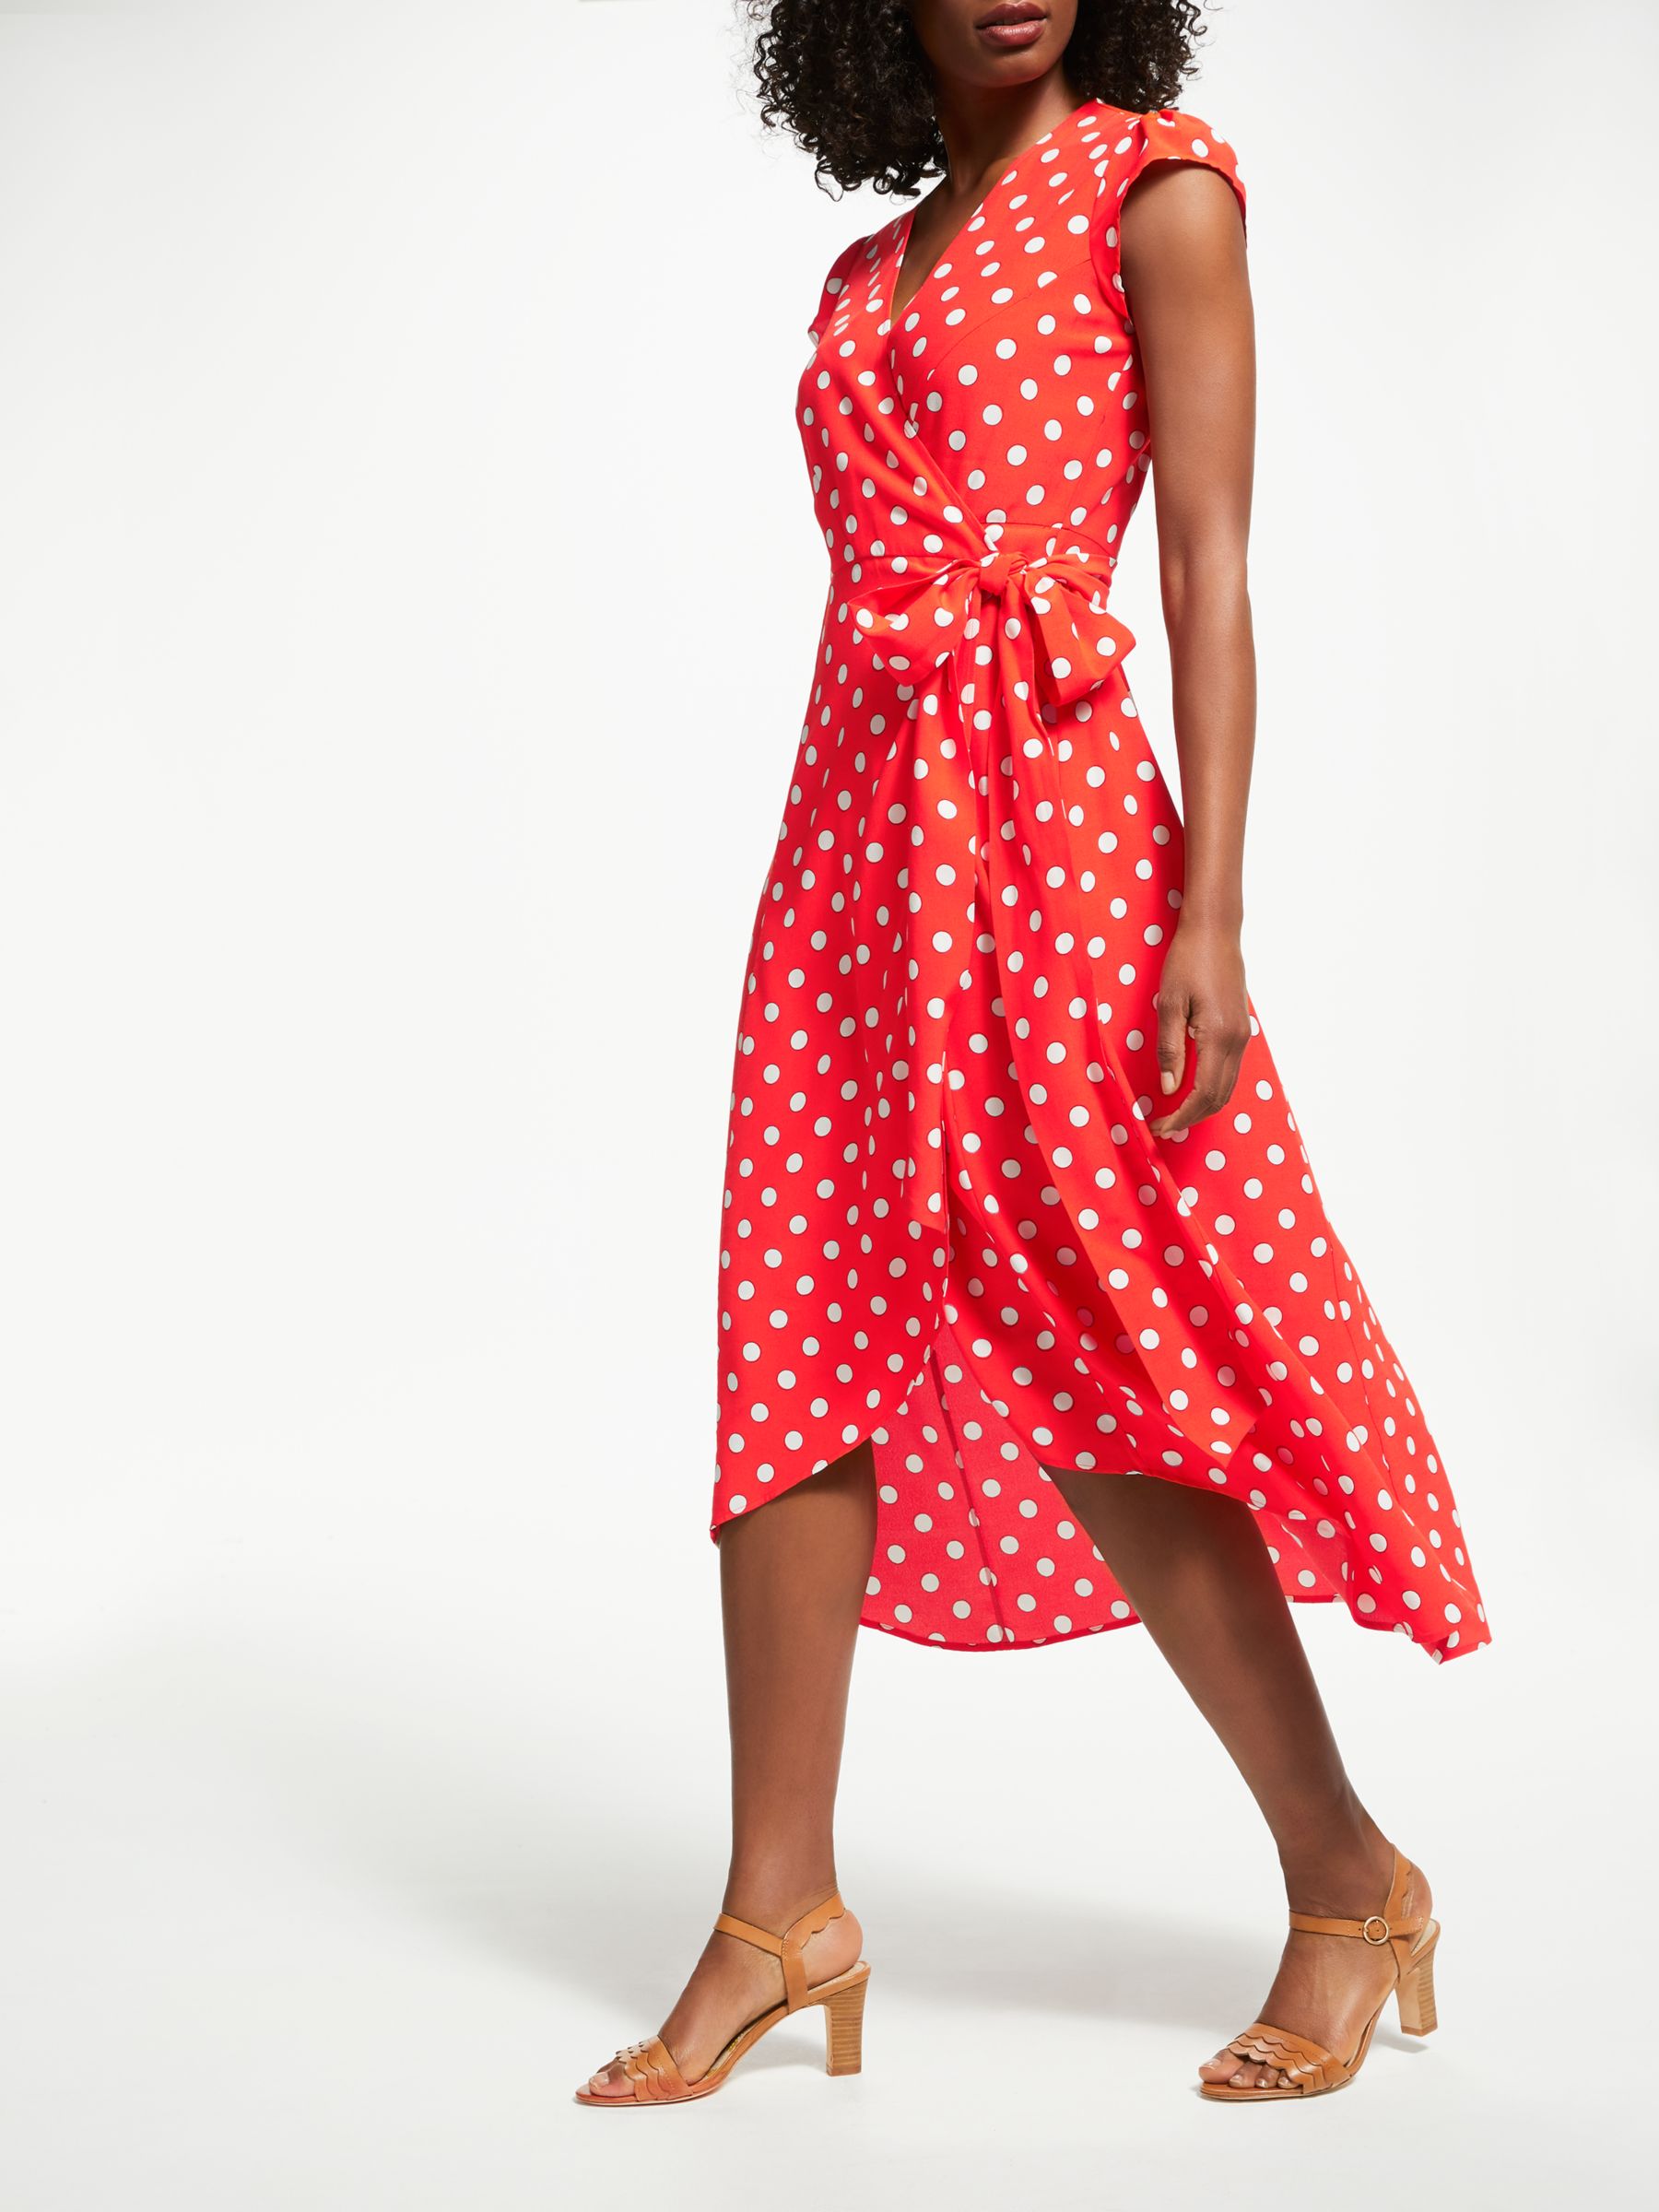 boden spotted dress